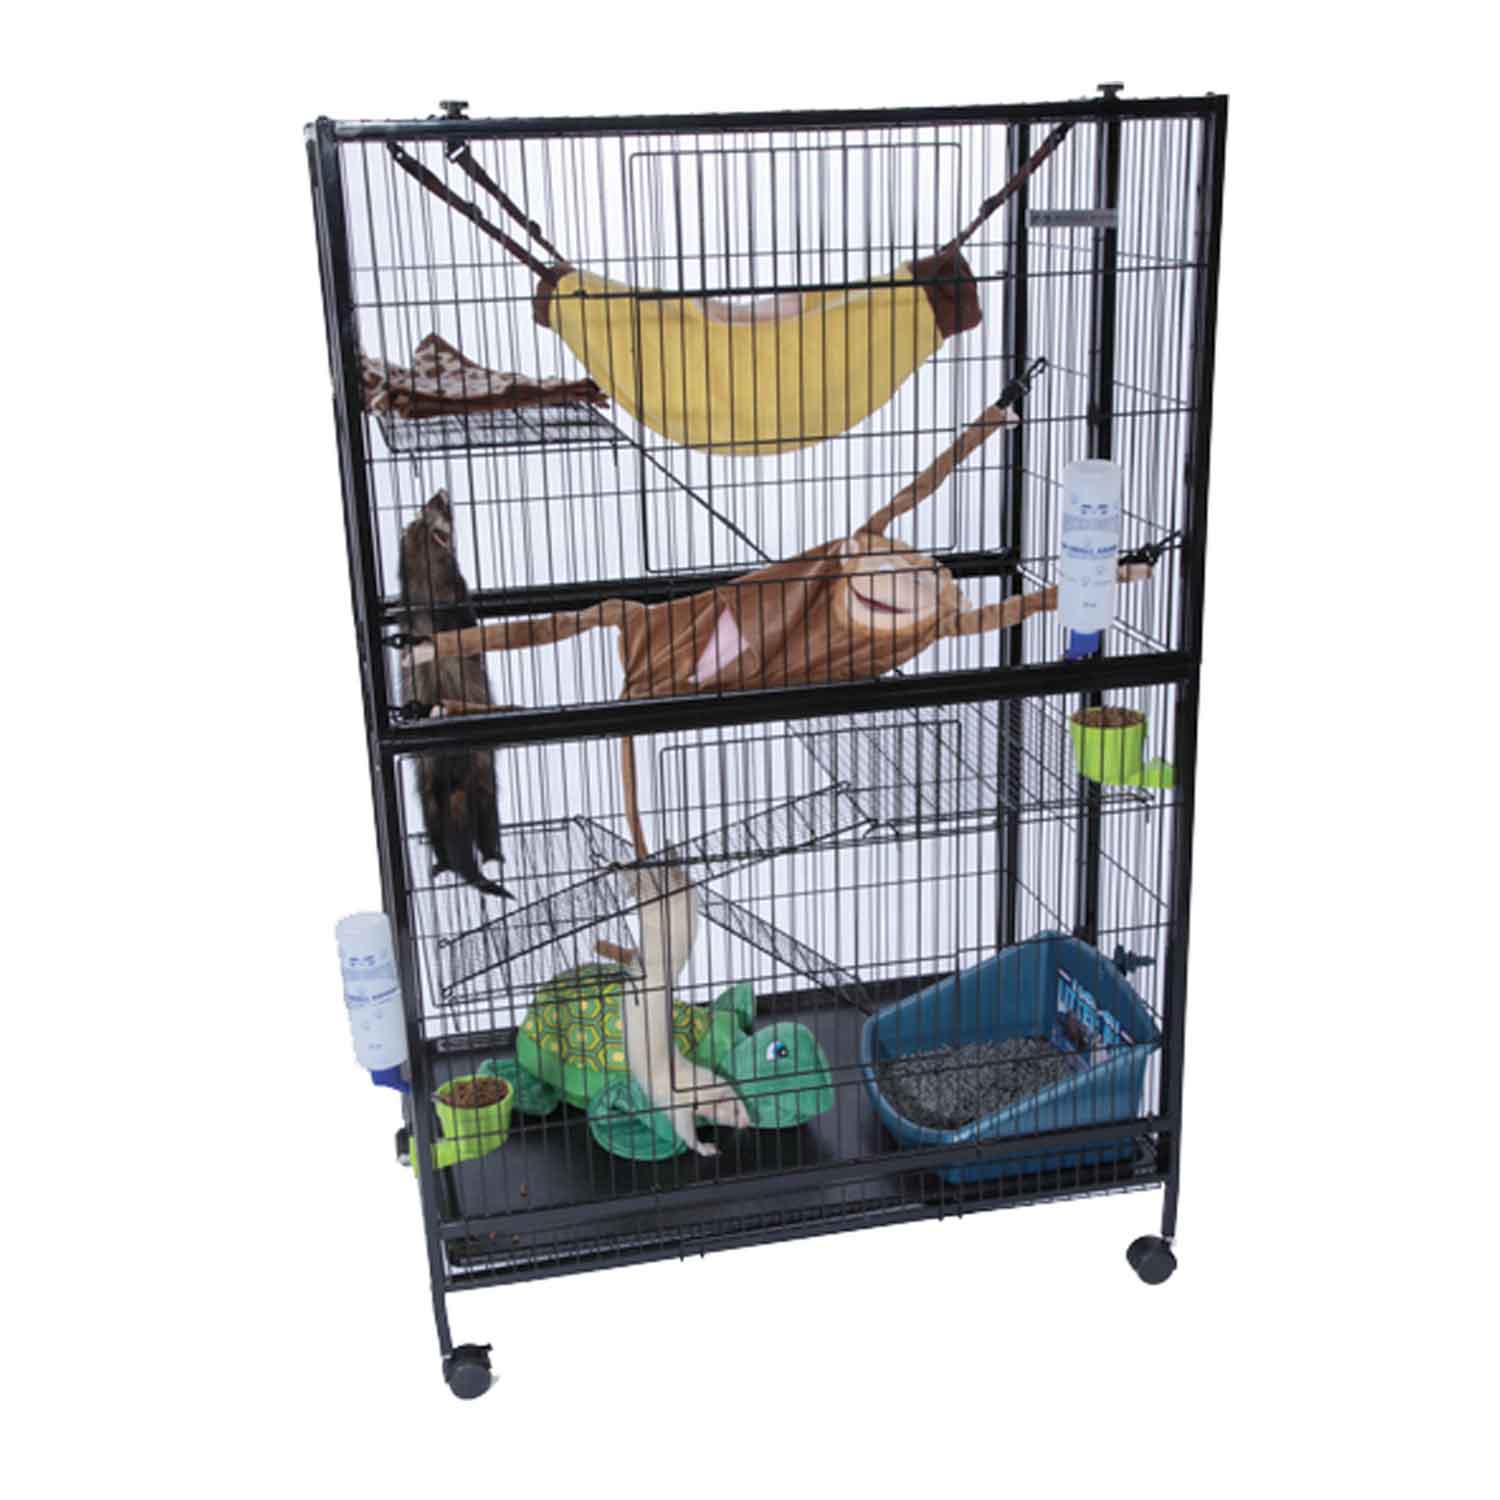 UPC 766501002577 product image for Marshall Pet Products Folding Ferret Mansion, 37 IN, Black | upcitemdb.com